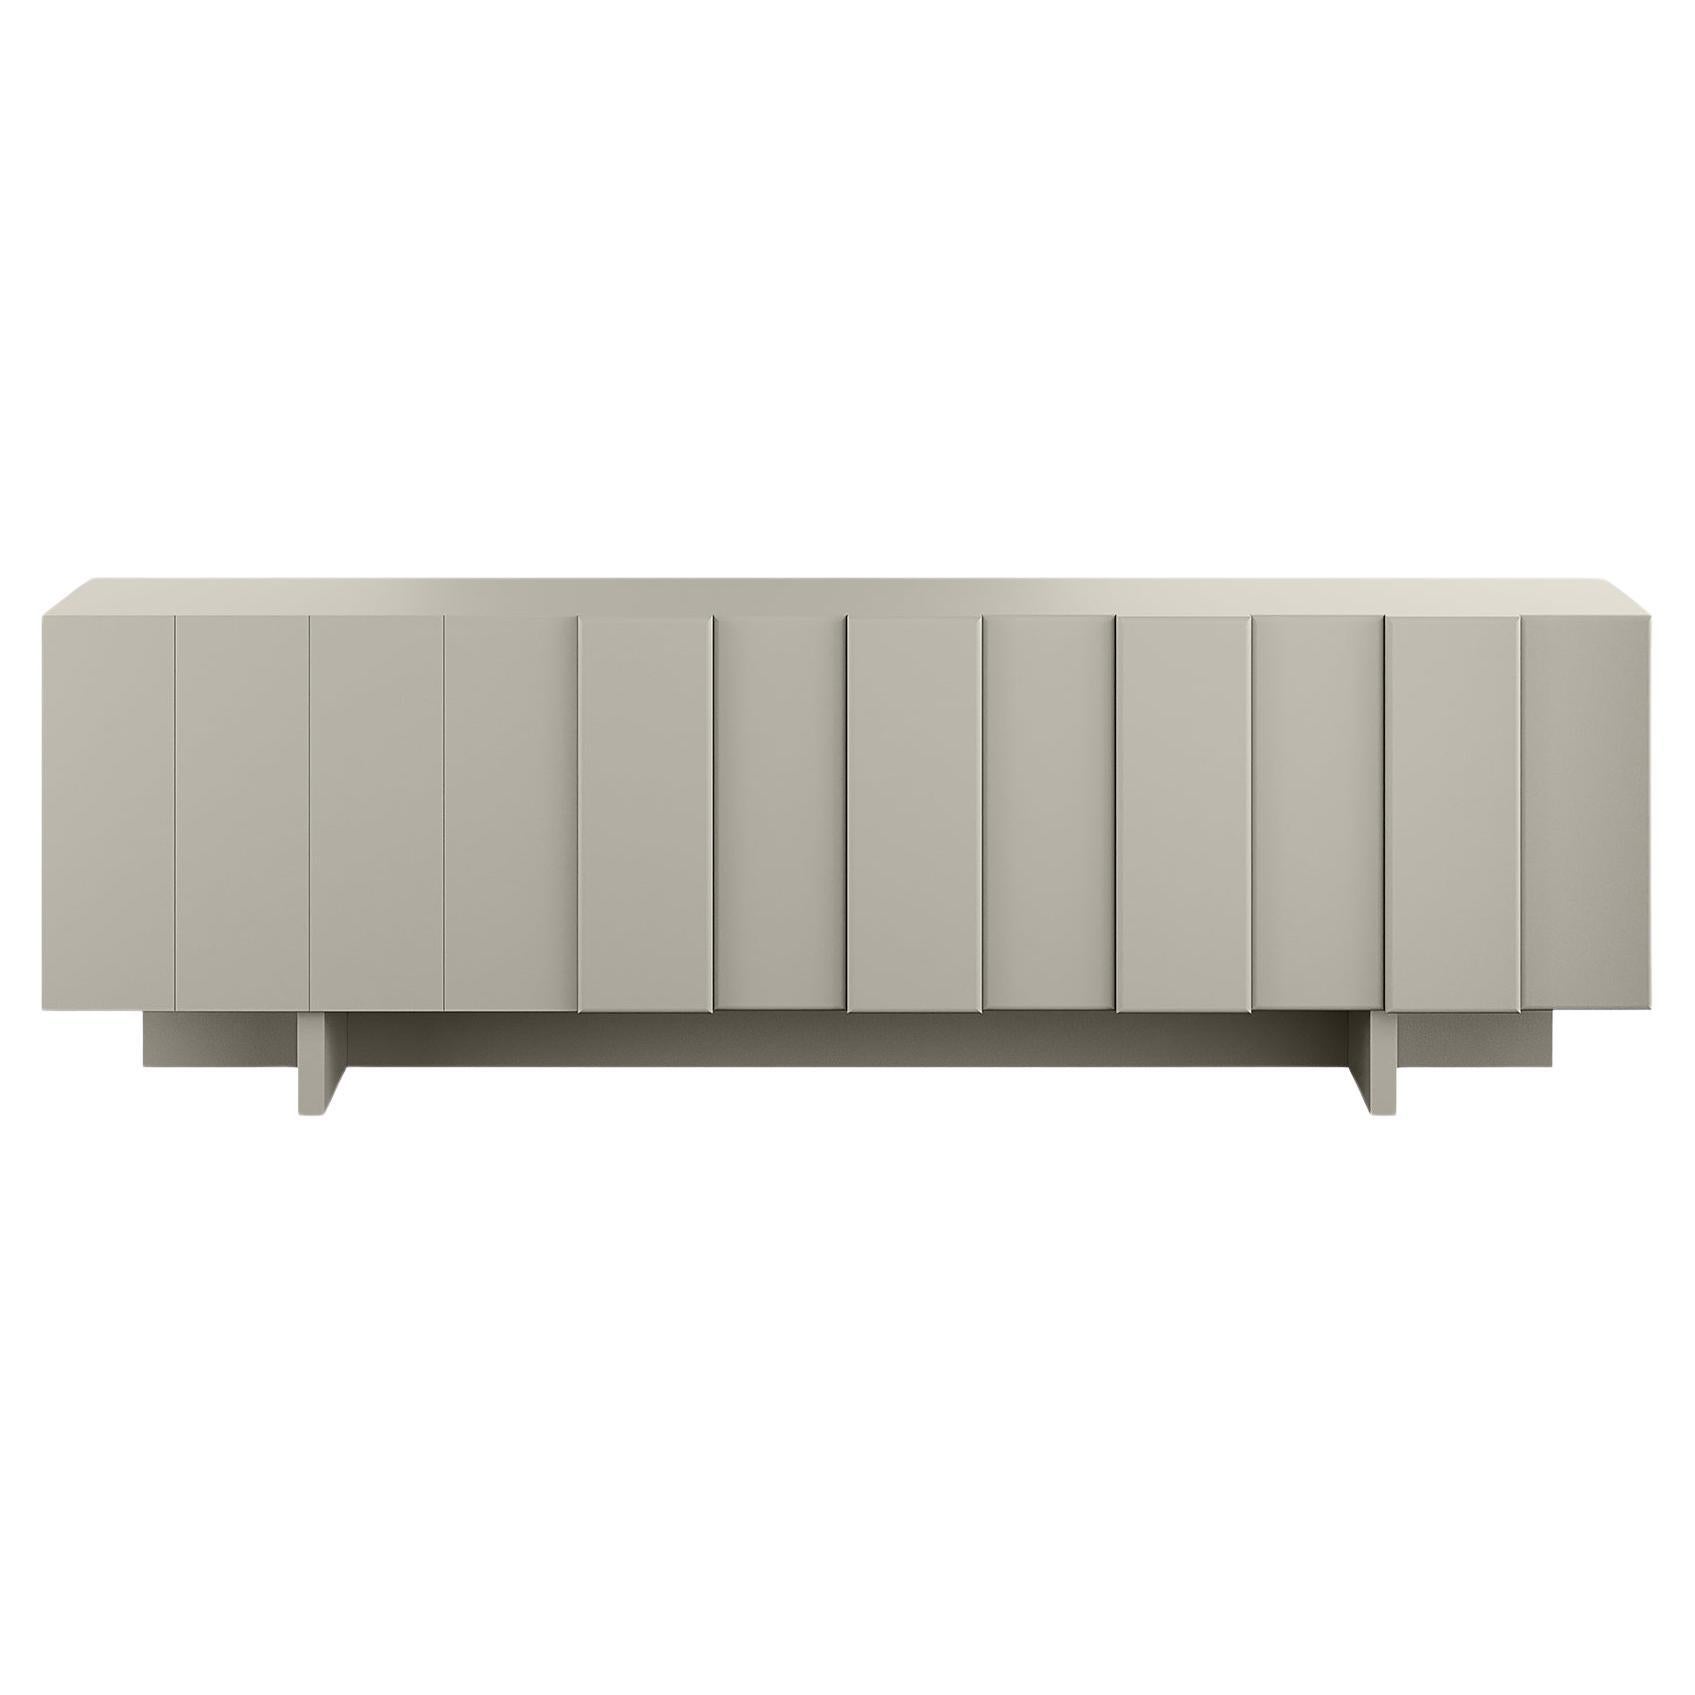 Contemporary Minimal Sideboard 3 Doors Wood Beige Mate Lacquer For Sale